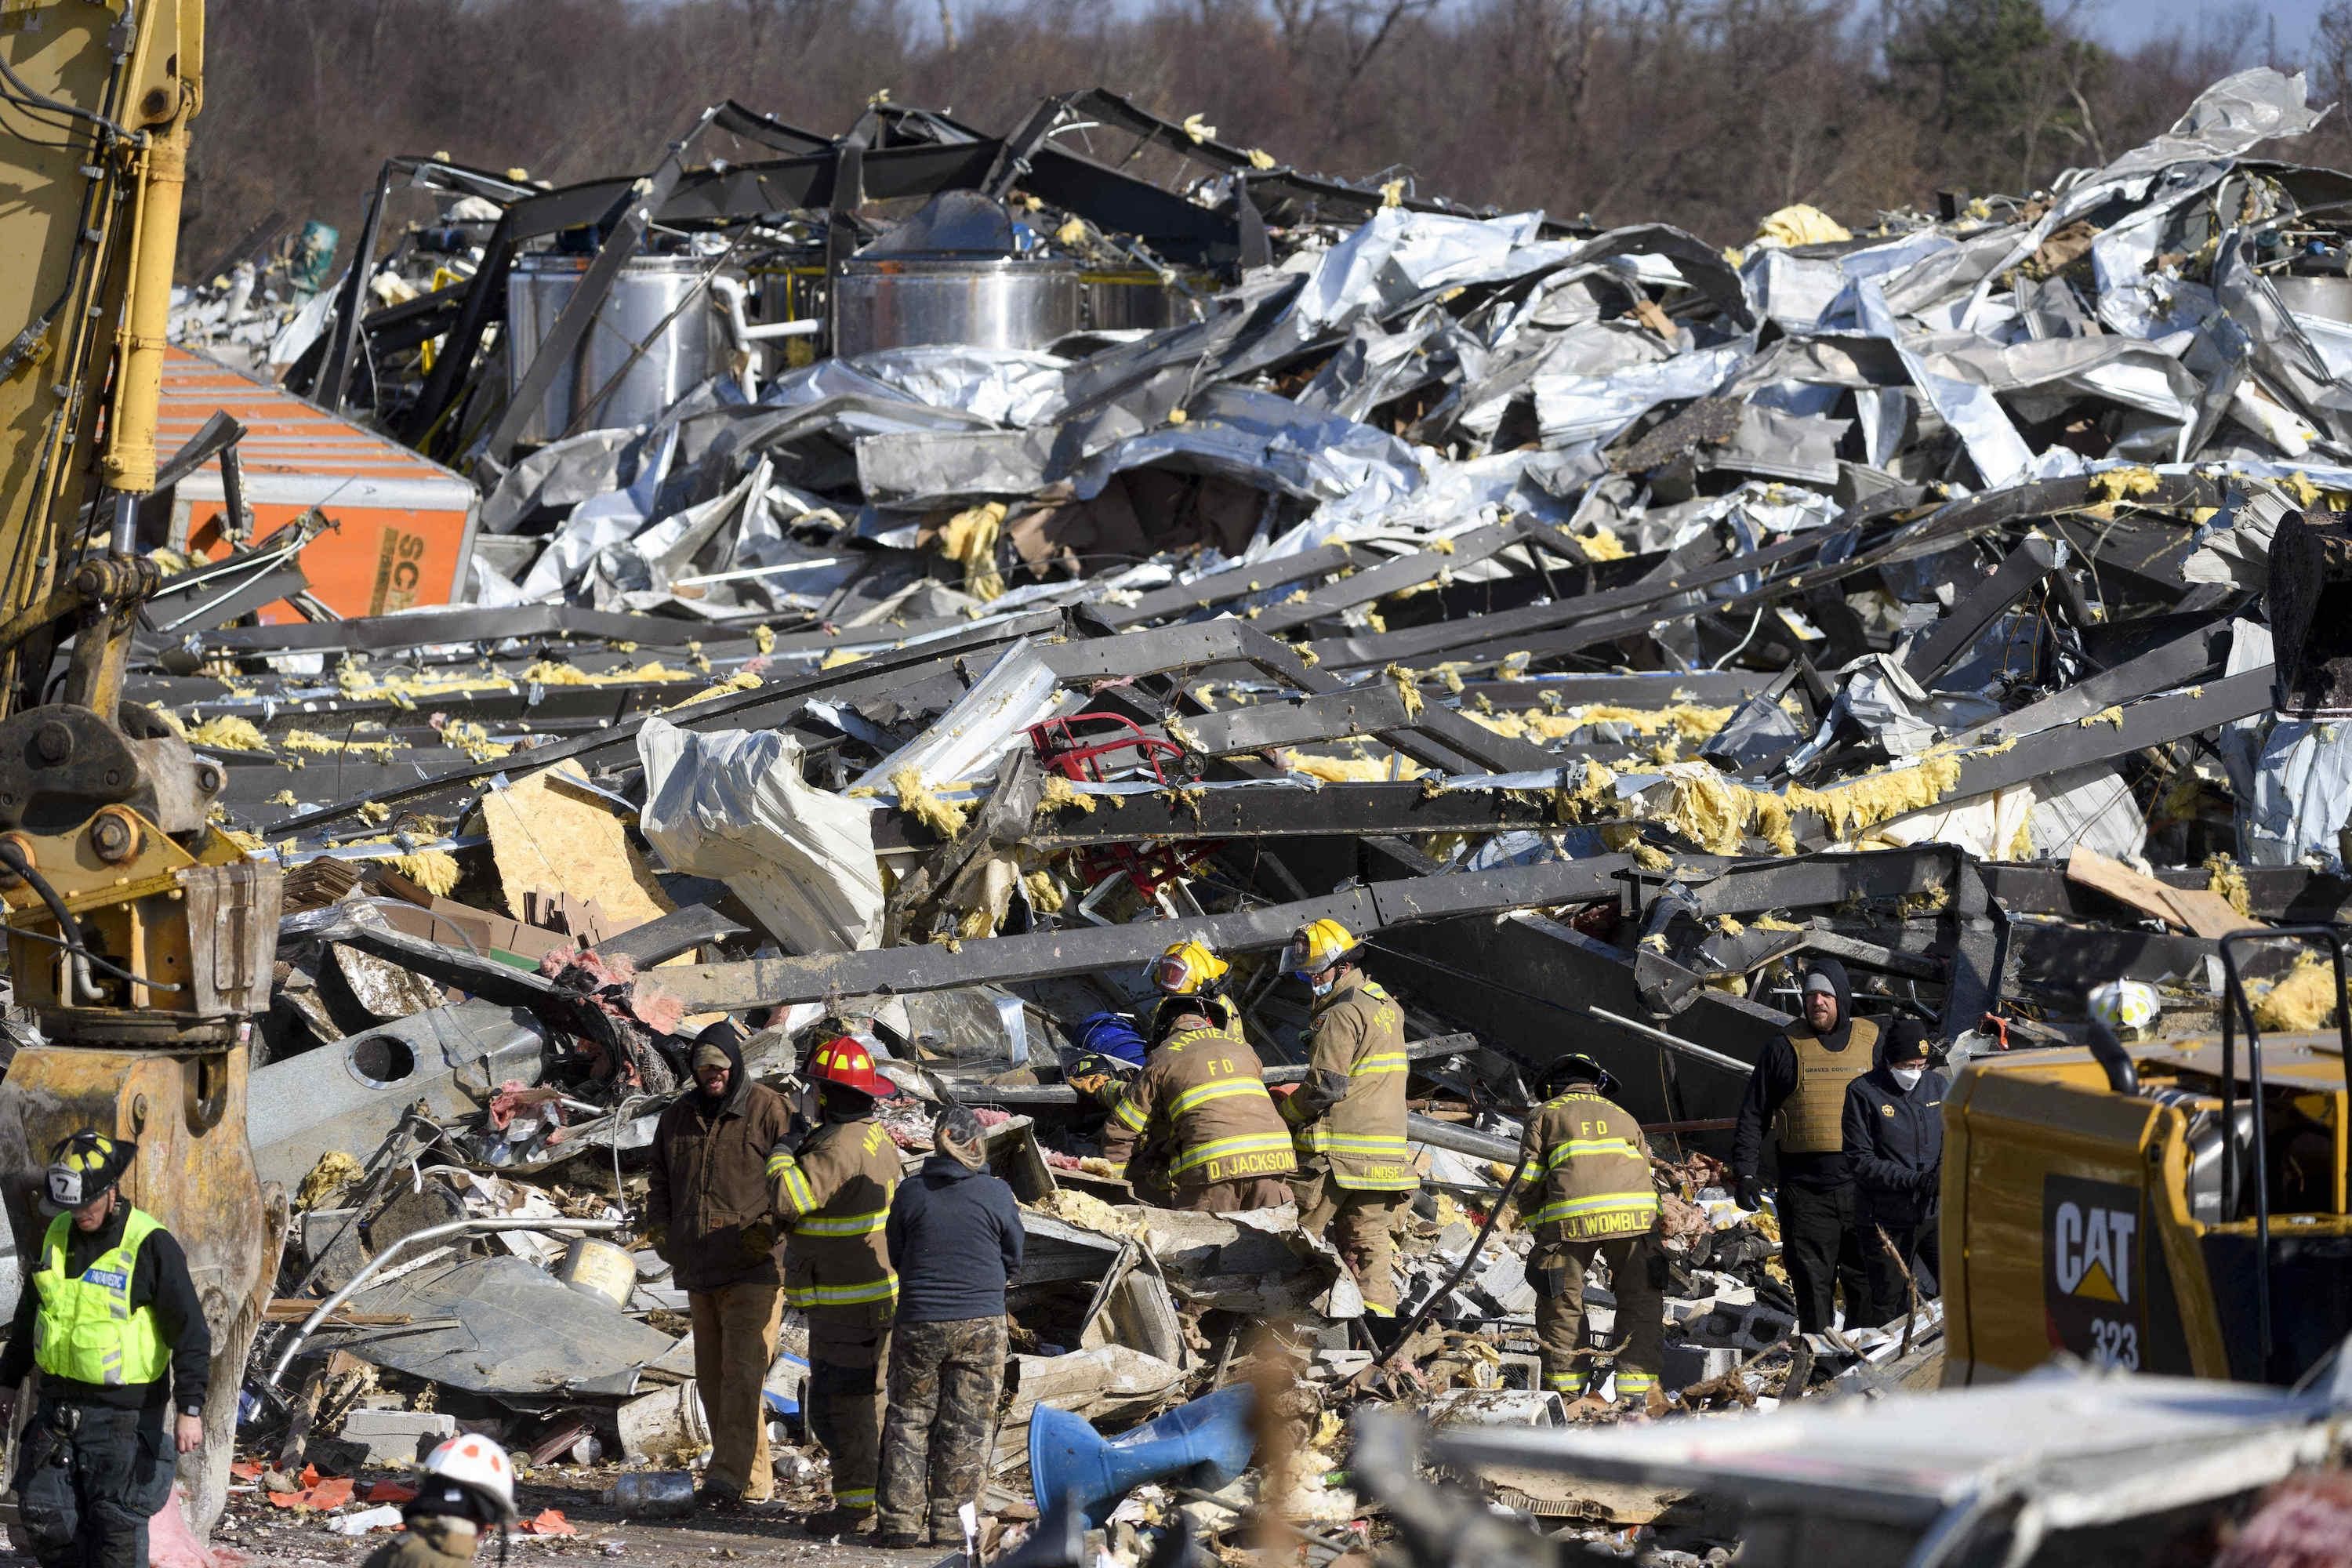 Emergency workers search through what is left of the Mayfield Consumer Products Candle Factory after it was destroyed by a tornado in Mayfield, Kentucky, on December 11, 2021